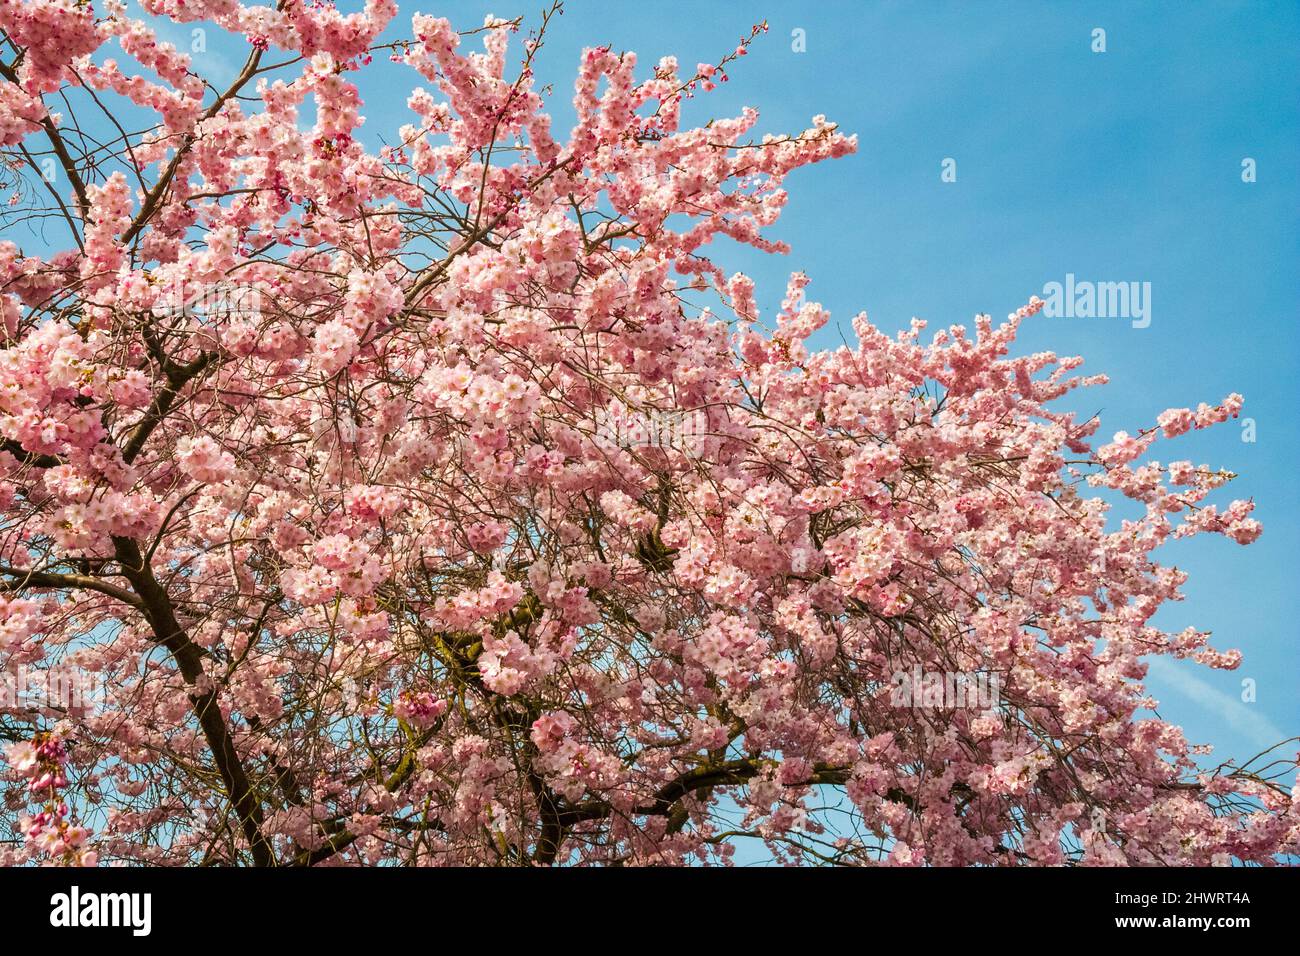 Beautiful close-up view of a cherry tree crown with numerous Japanese ornamental cherry blossoms (Prunus serrulata) on its branches in spring in the... Stock Photo